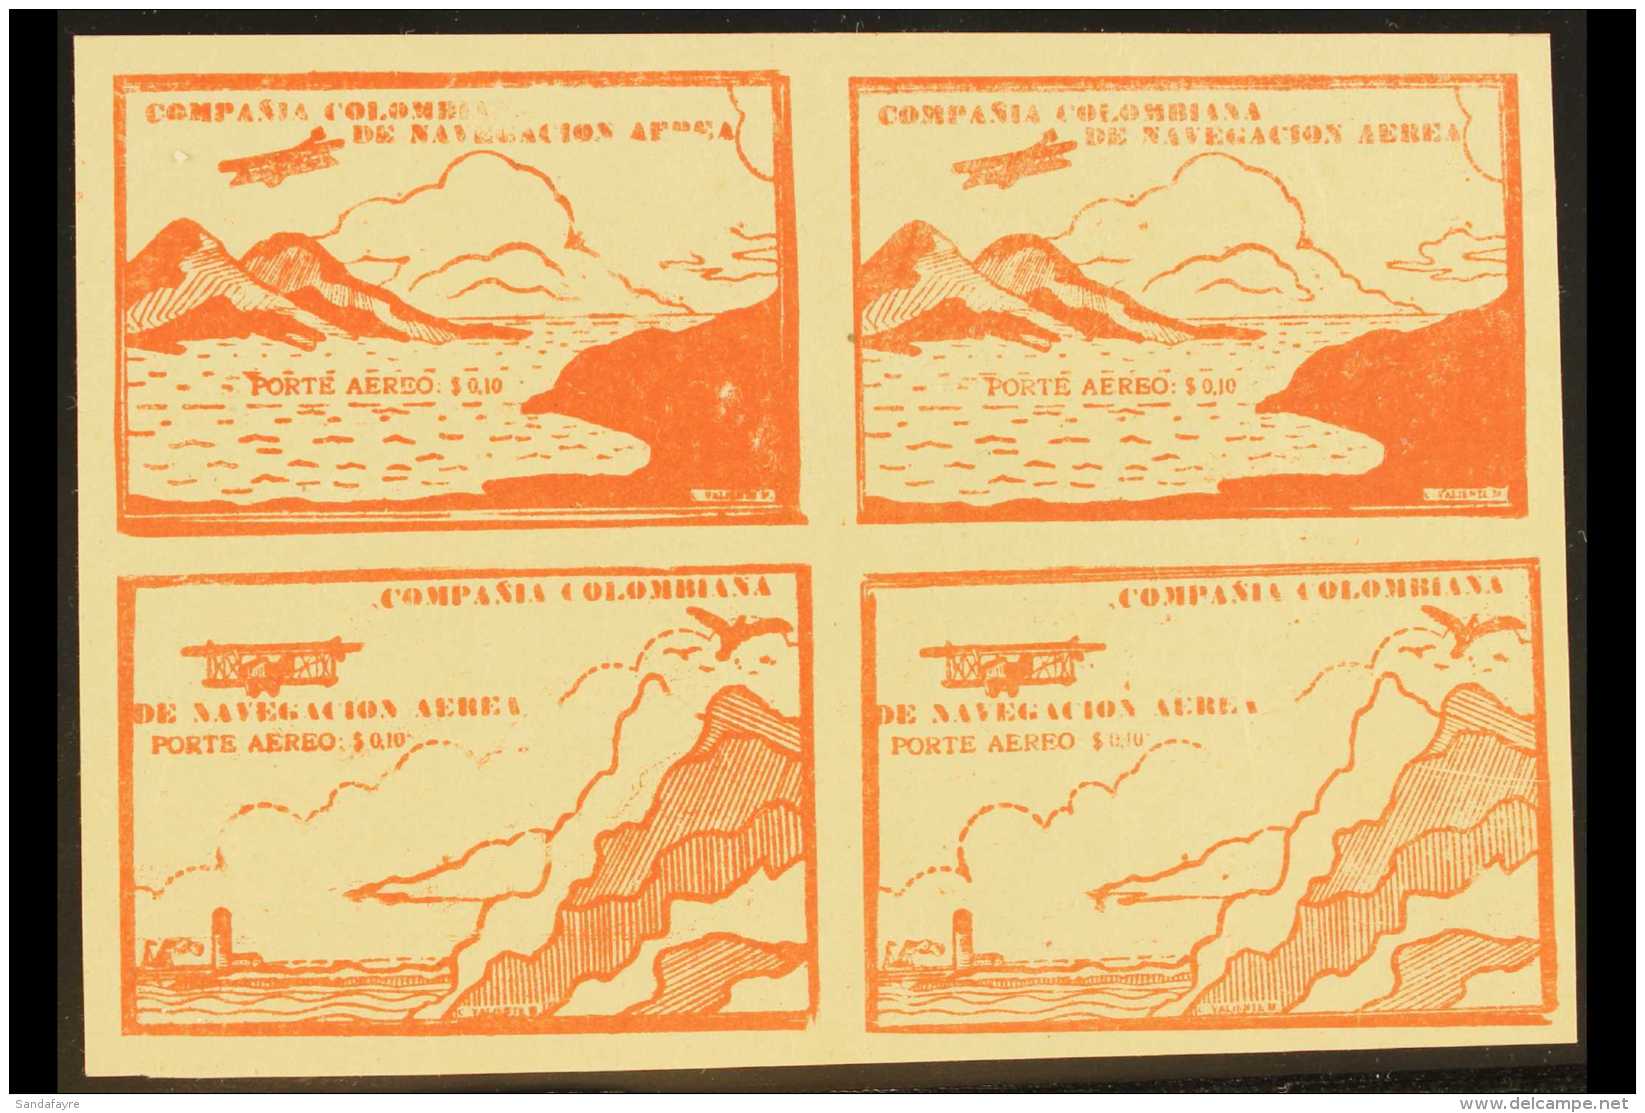 SCADTA 1920 10c Brick-red Imperf SE-TENANT BLOCK Of 4, Containing Two 'Sea And Mountain' And Two 'Cliffs And... - Colombie